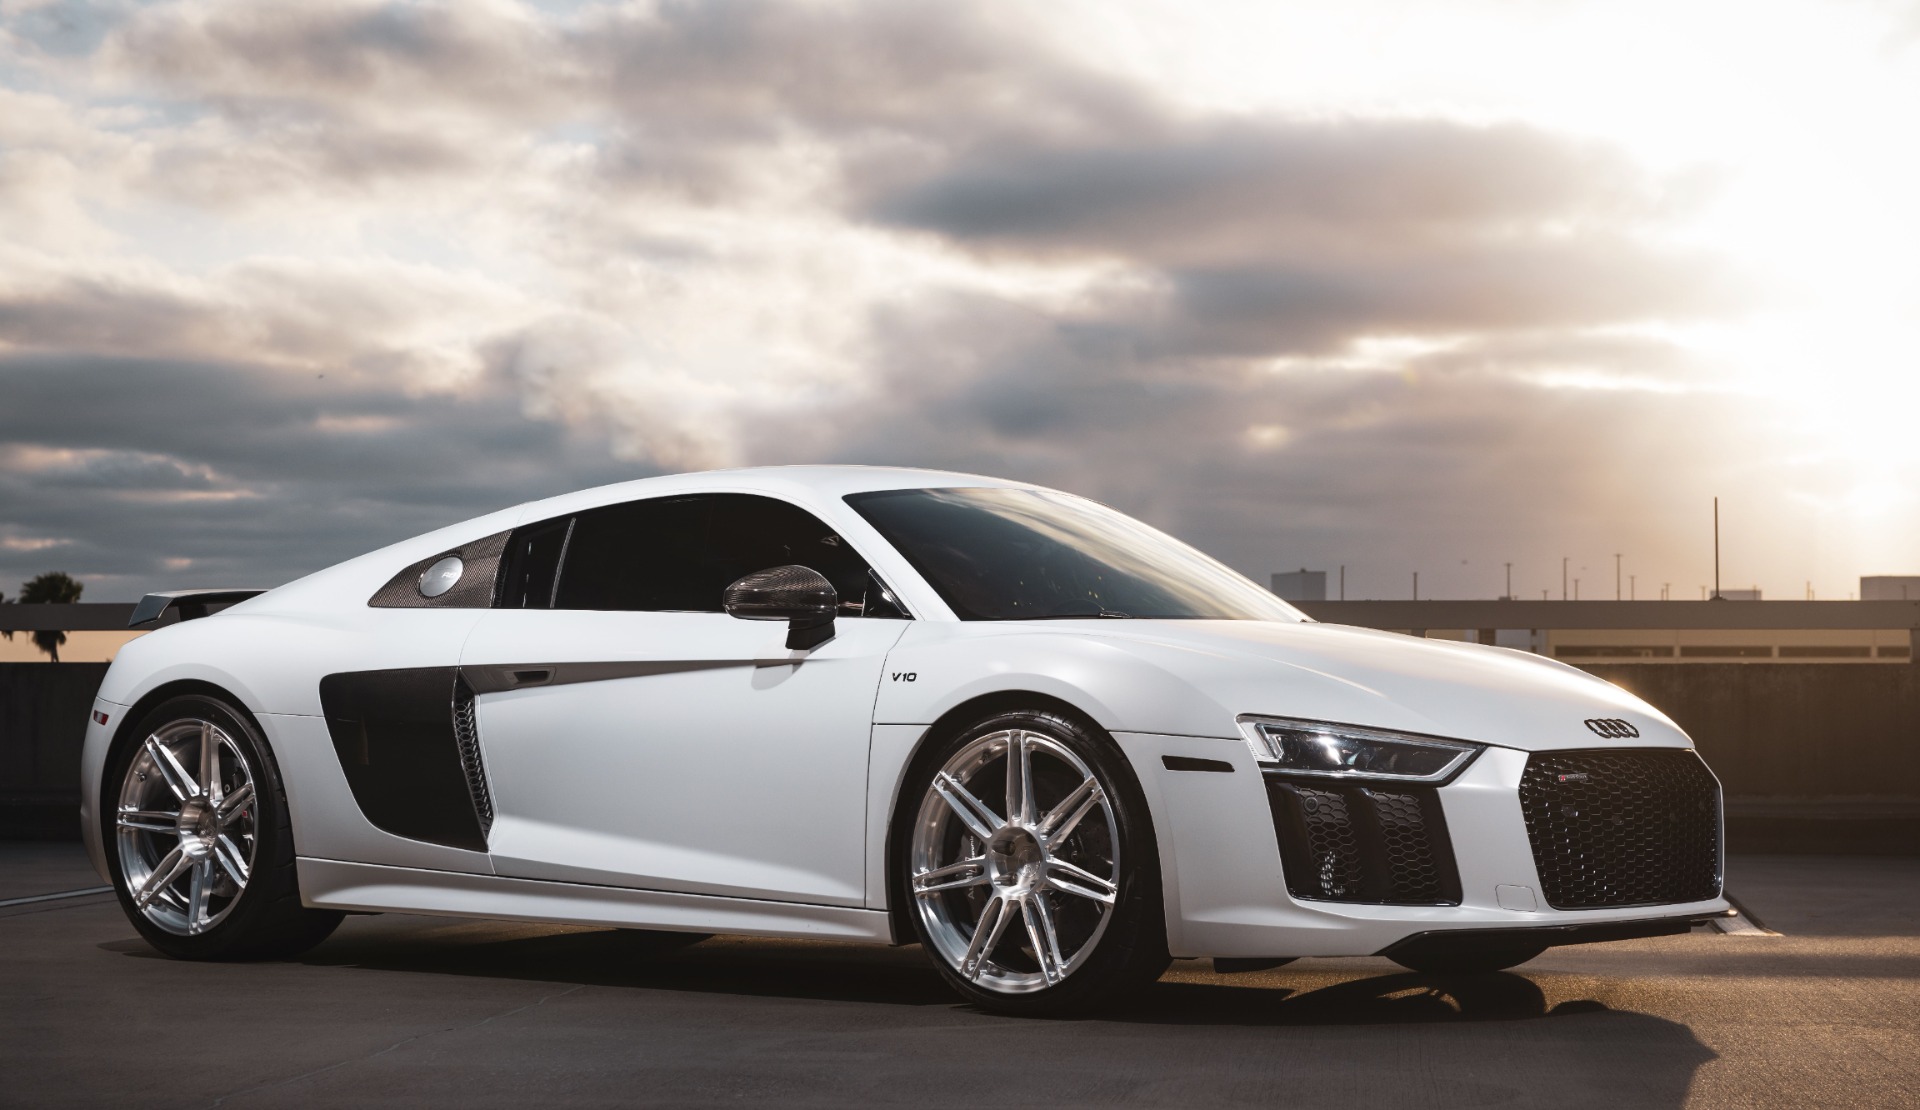 Used 2017 Audi R8 5.2 quattro V10 Plus ALPHA 12 TWIN TURBO, BUILT MOTOR AND  TRANS! 1300WHP! For Sale ($269,800) | Chicago Motor Cars Stock #H7902446-EG